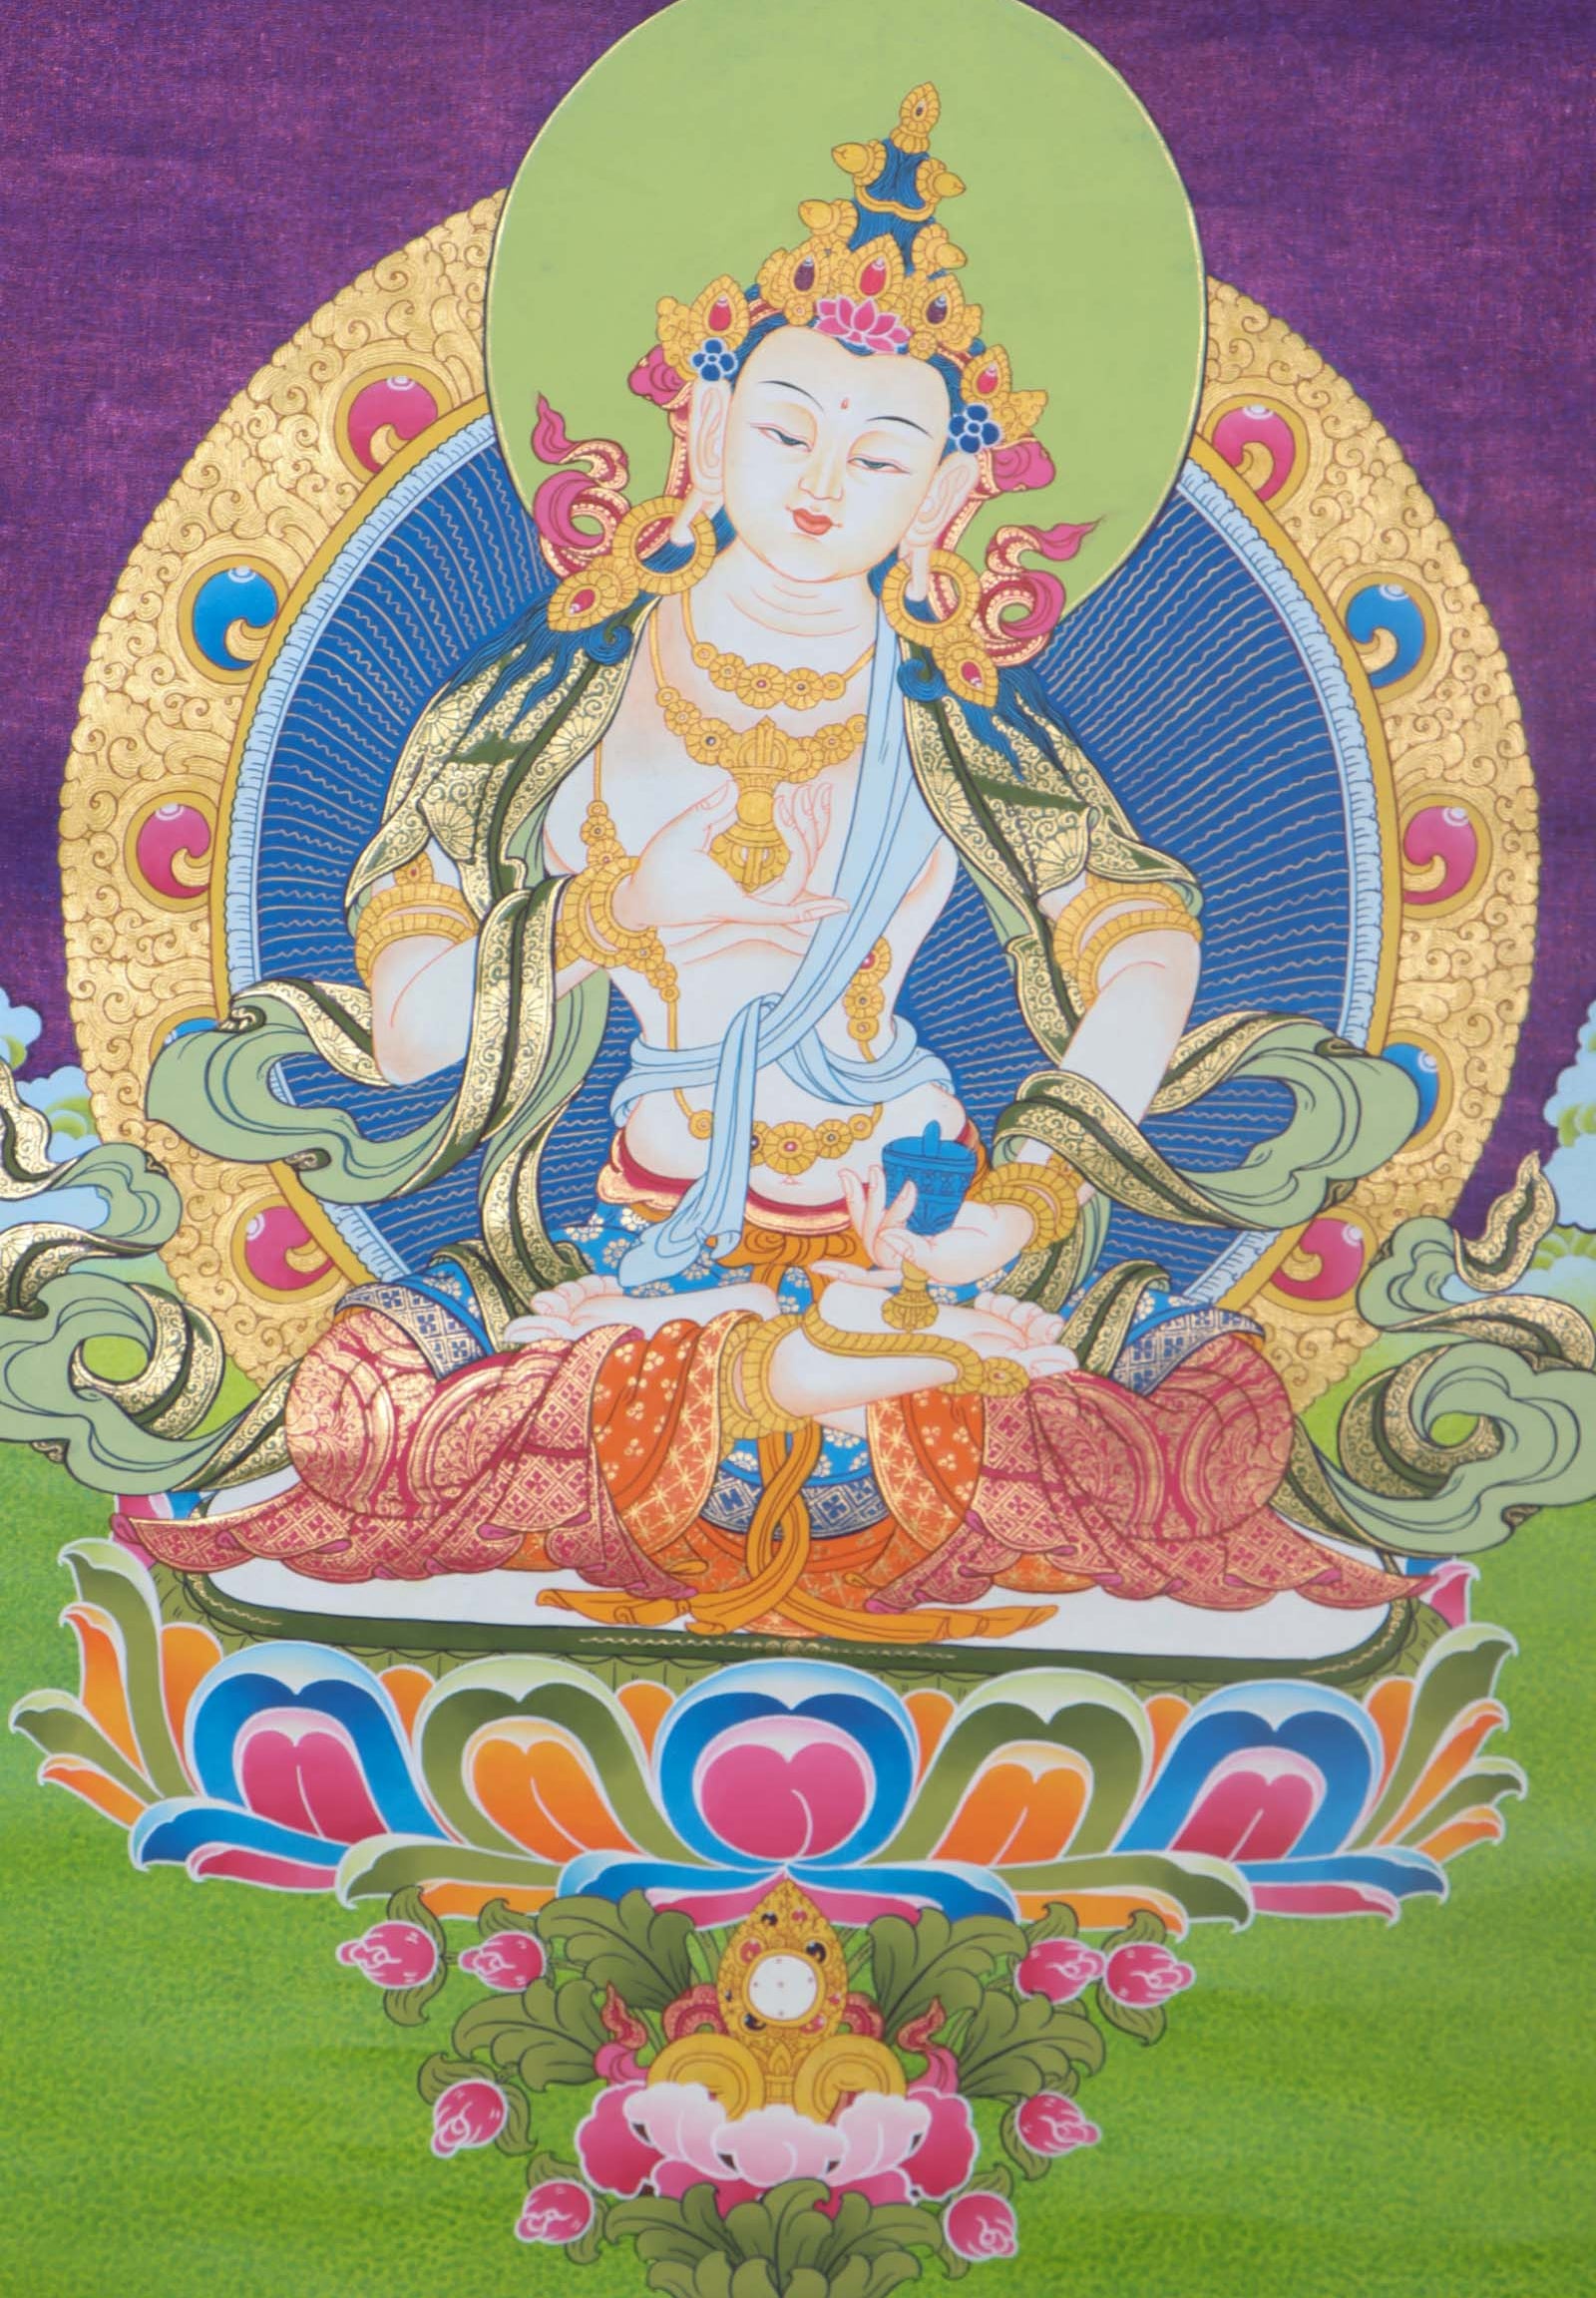 Vajrasattva Thangka - a colorful painting featuring a peaceful deity with white skin and a gentle expression. Holding a vajra and a bell, he sits on a lotus flower, surrounded by intricate patterns and symbols. A powerful representation of purity and enlightenment in Tibetan Buddhism.